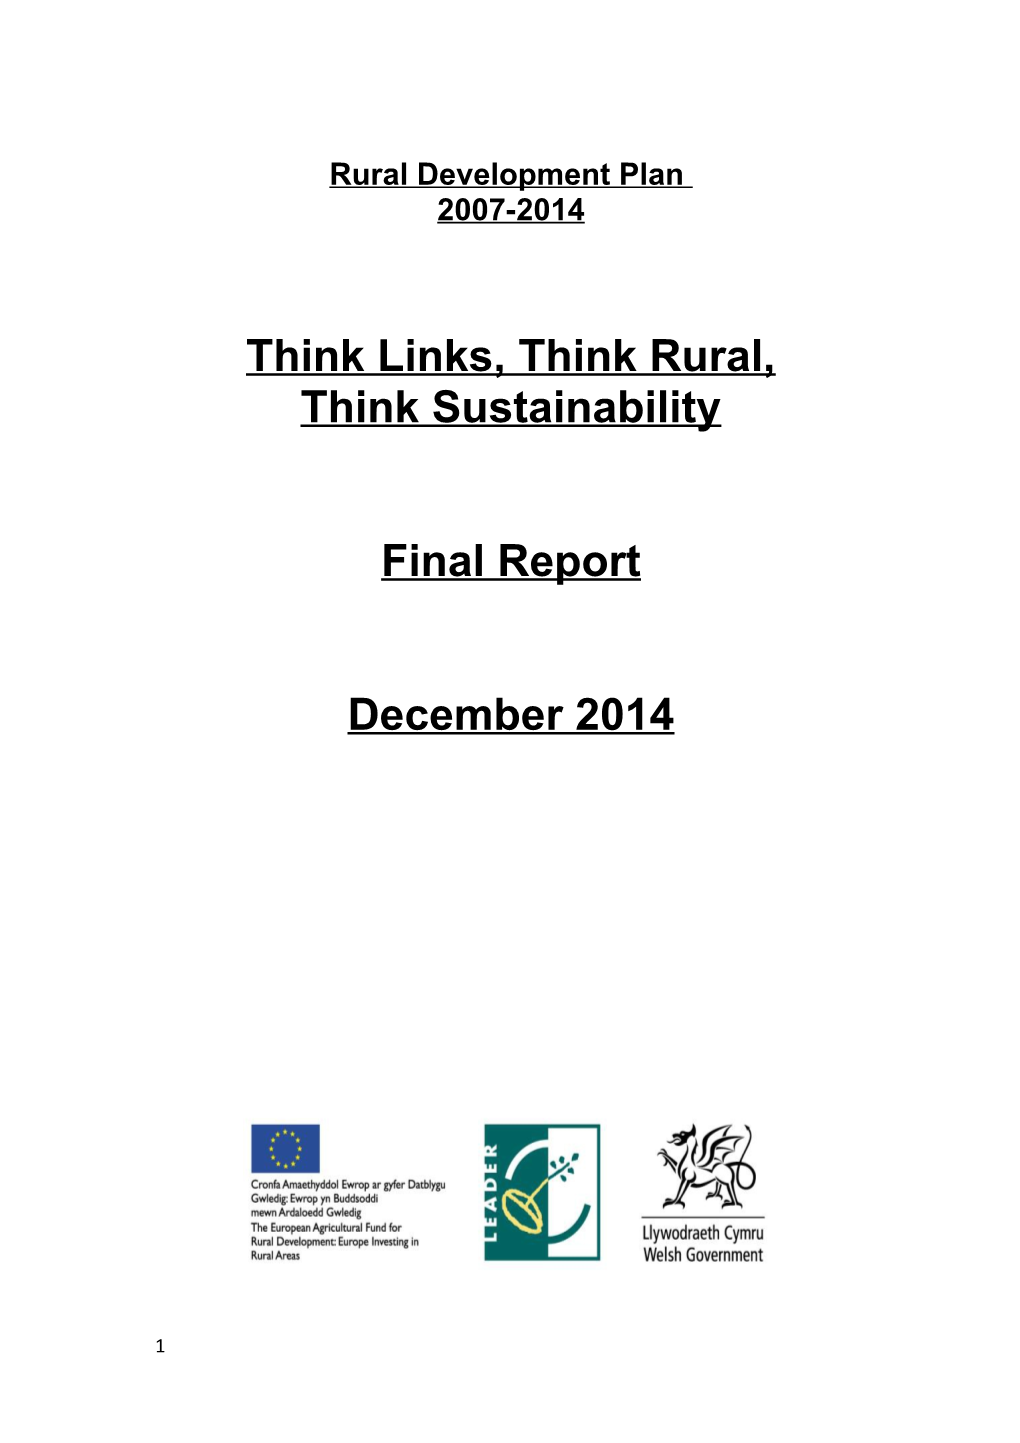 Think Links, Think Rural